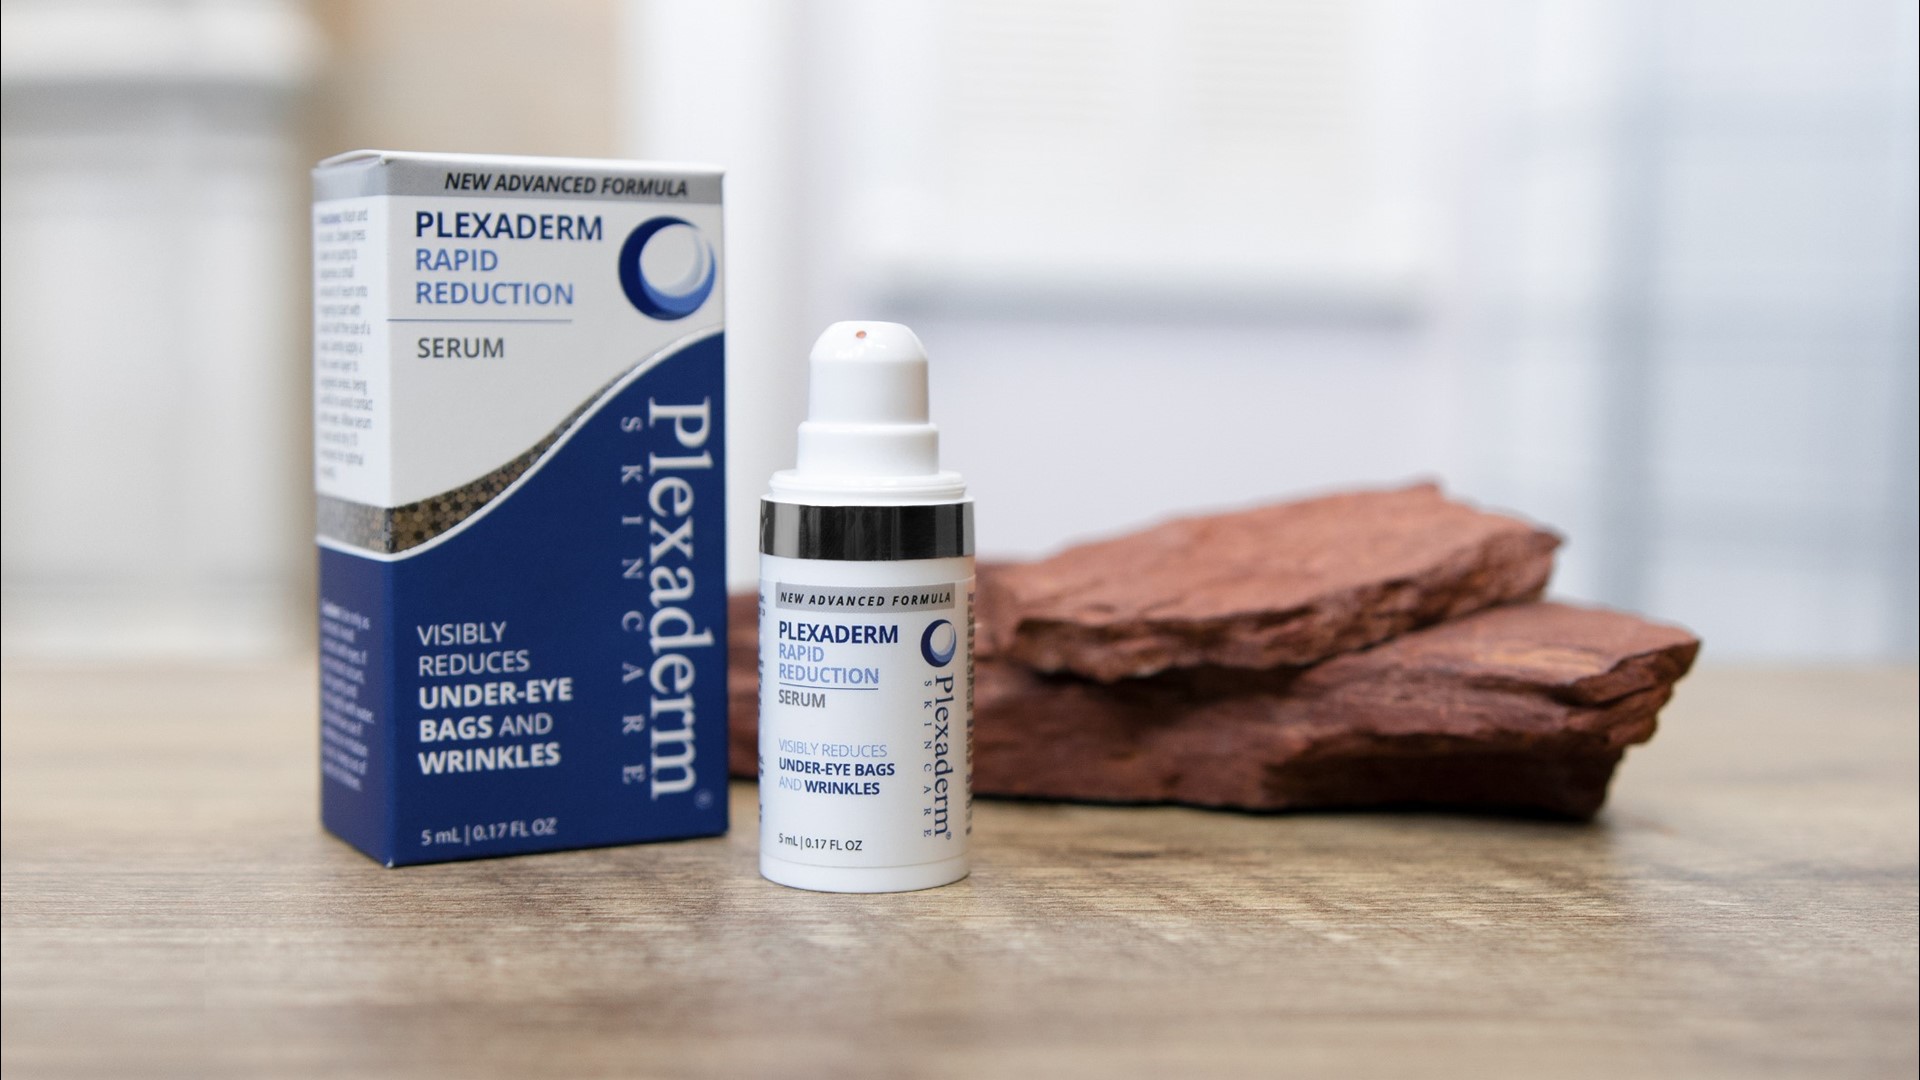 This non-invasive serum can work in just minutes to tighten skin. Sponsored by Plexaderm.